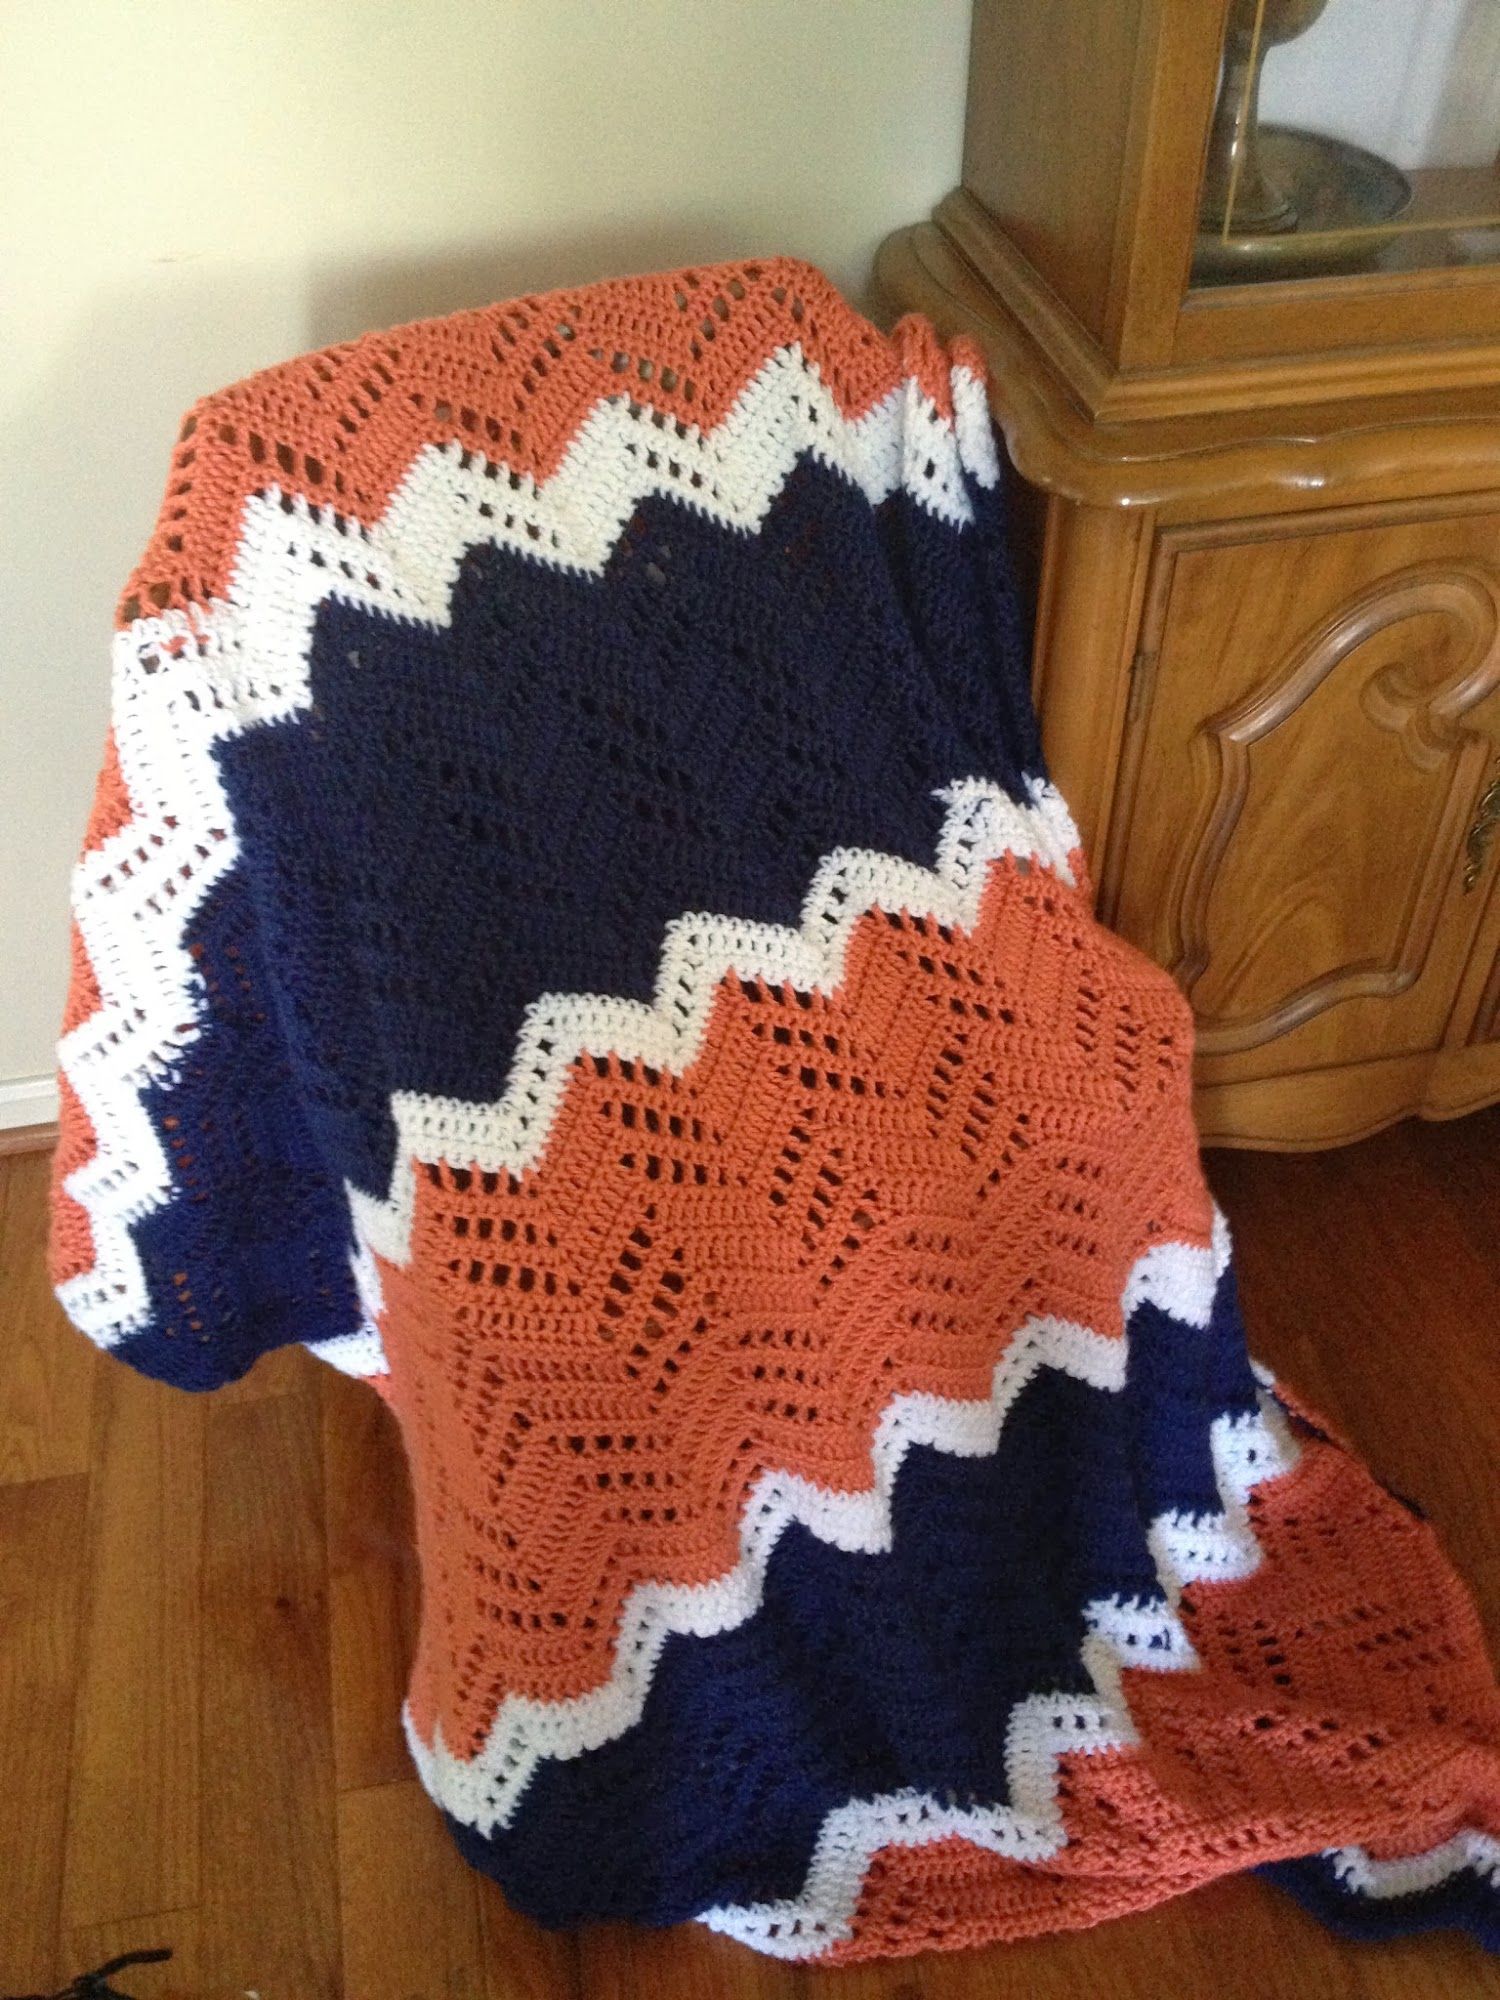  Another view of the blanket 